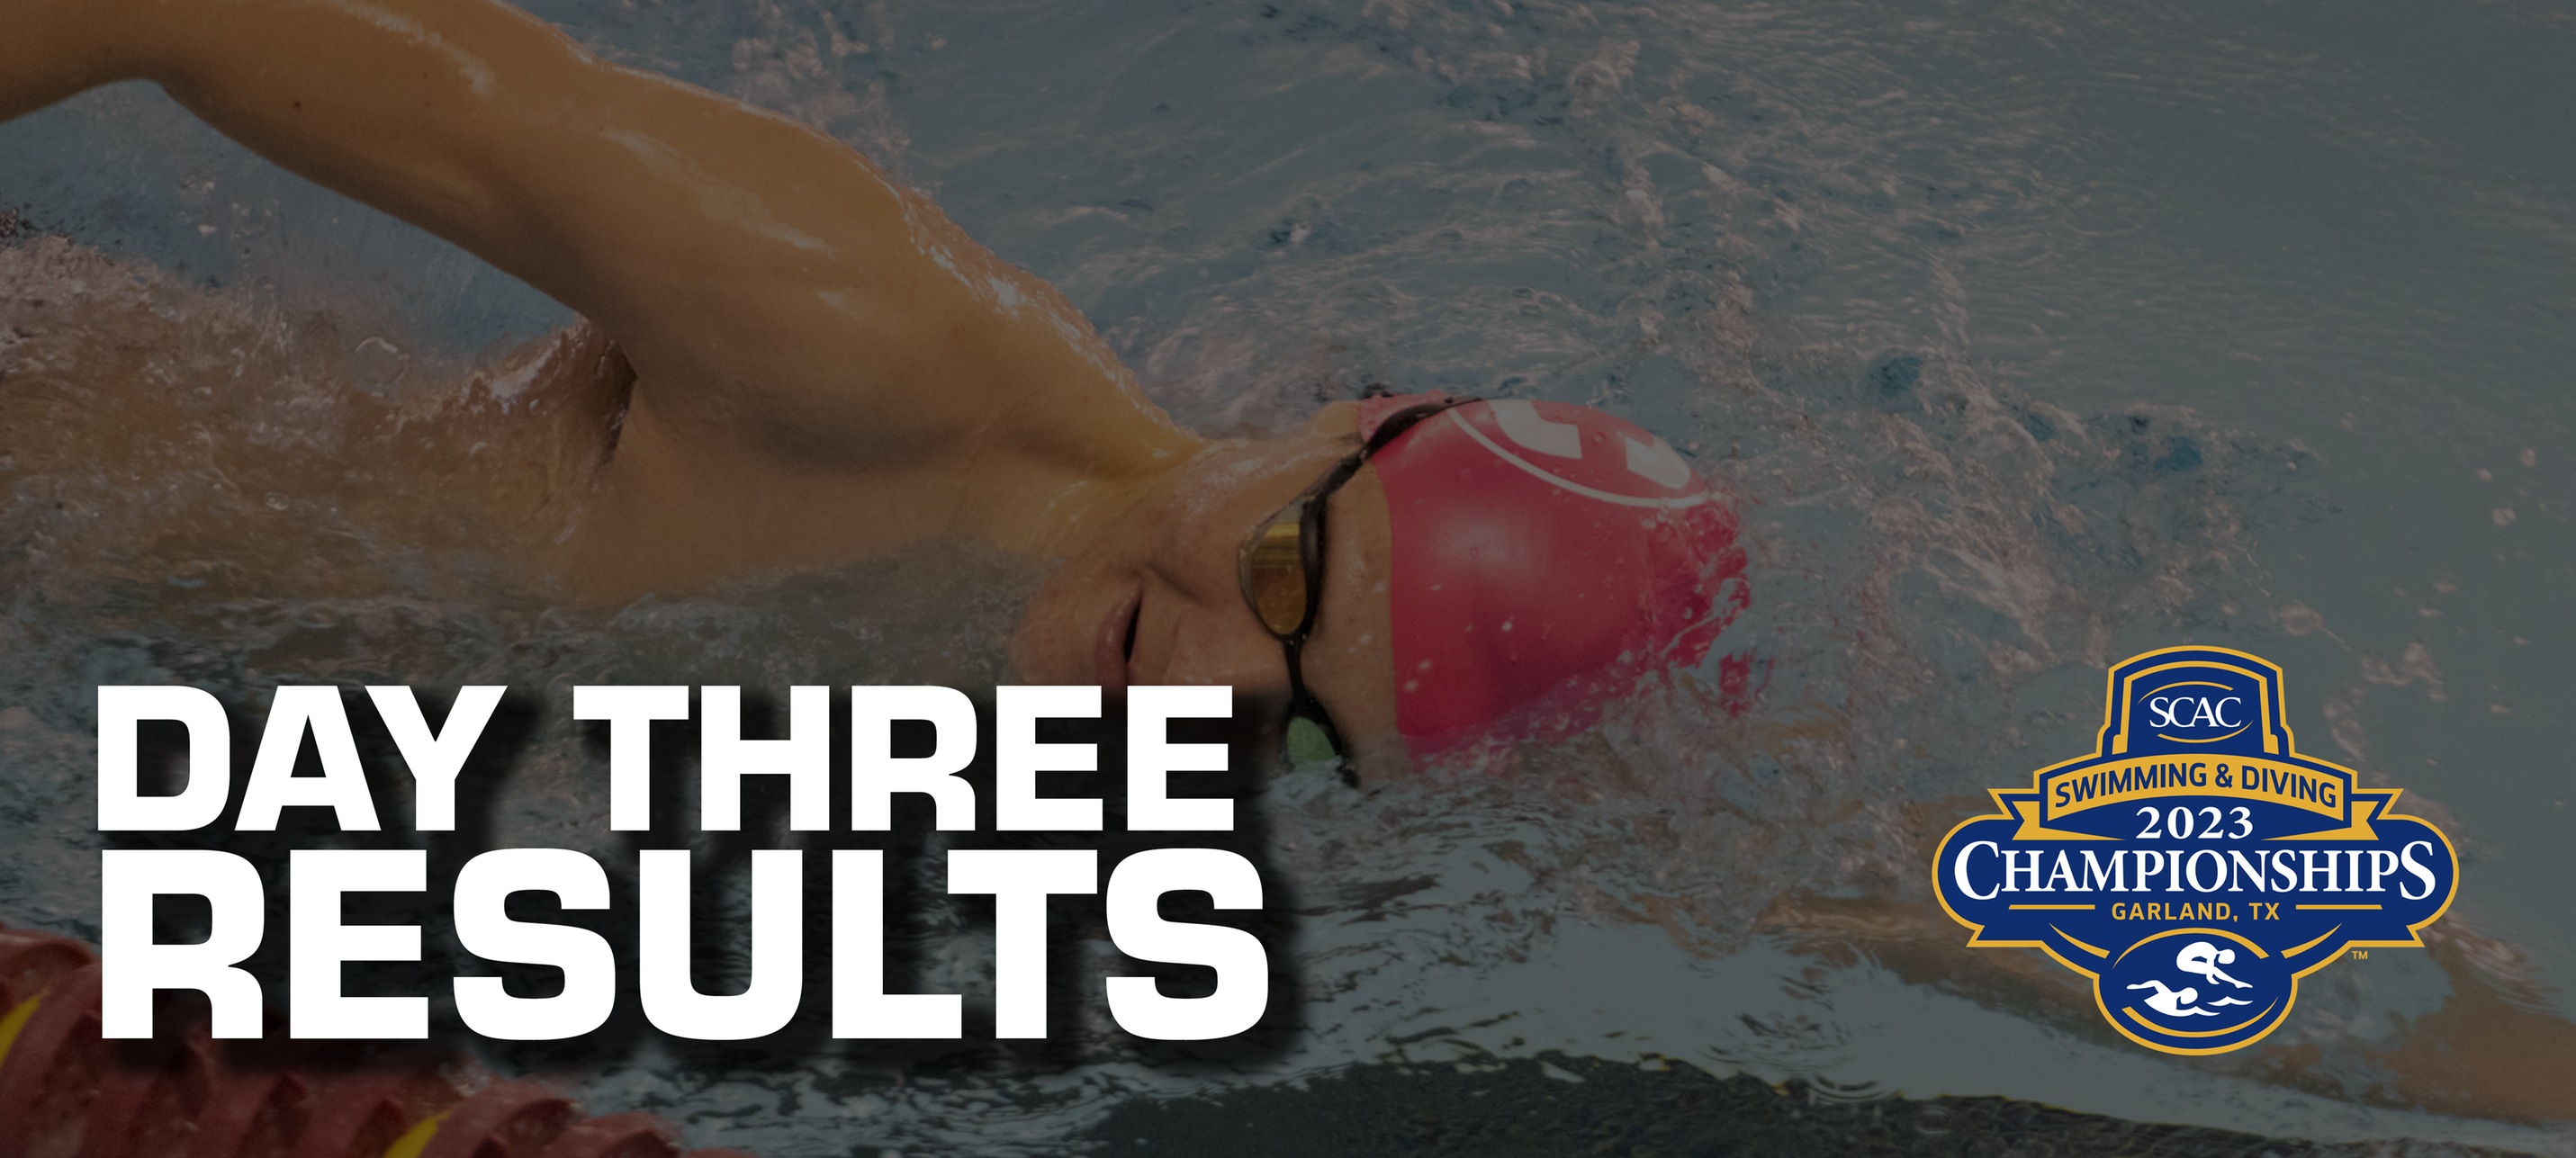 Gents Remain Seventh After Day Three At SCAC Championships